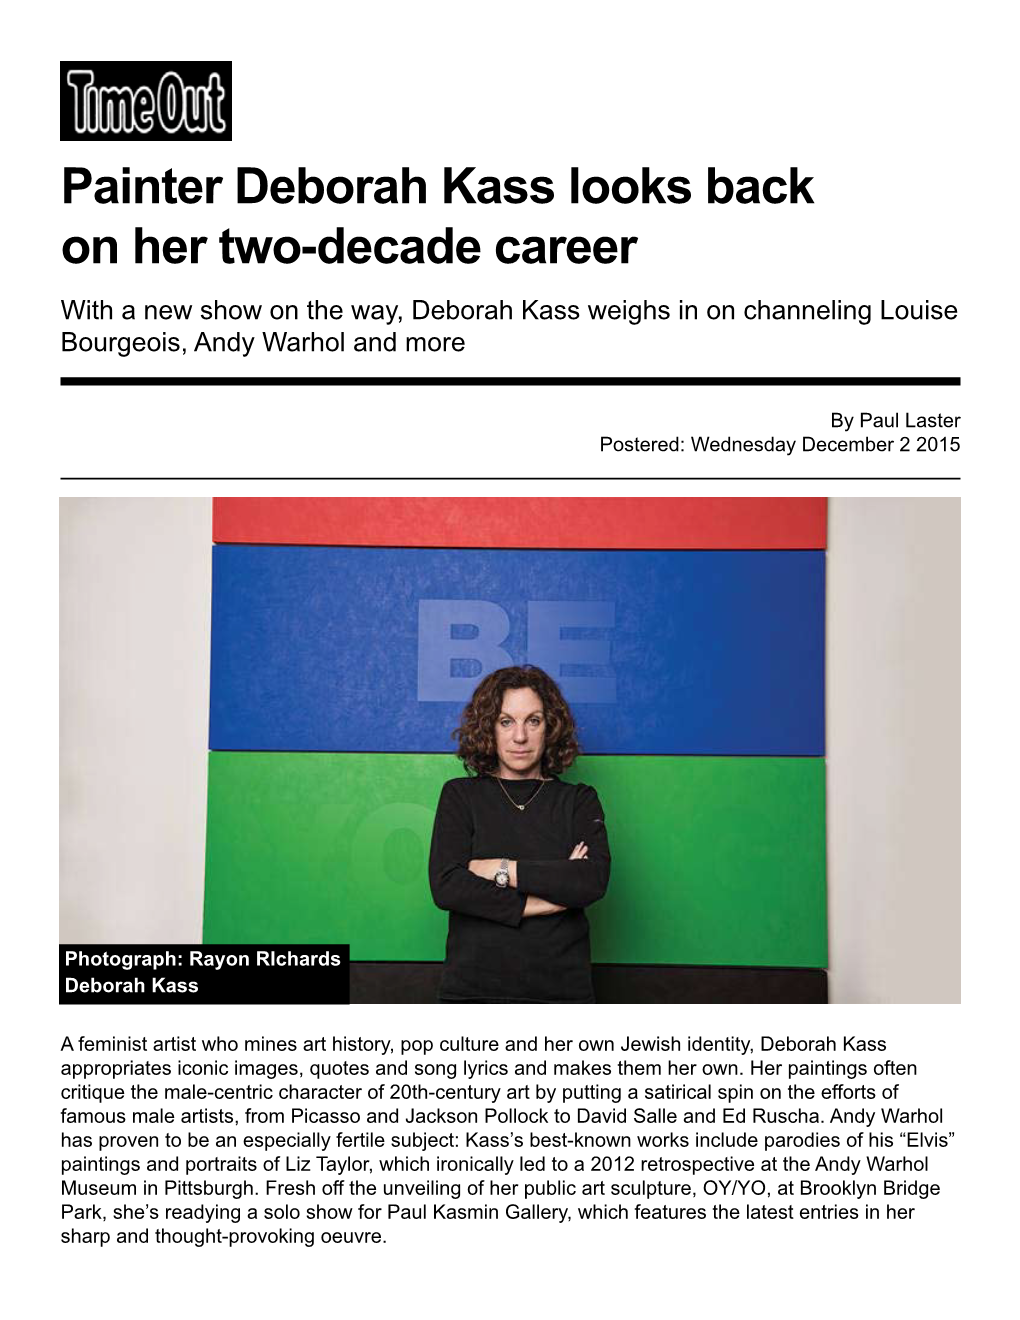 Painter Deborah Kass Looks Back on Her Two-Decade Career with a New Show on the Way, Deborah Kass Weighs in on Channeling Louise Bourgeois, Andy Warhol and More